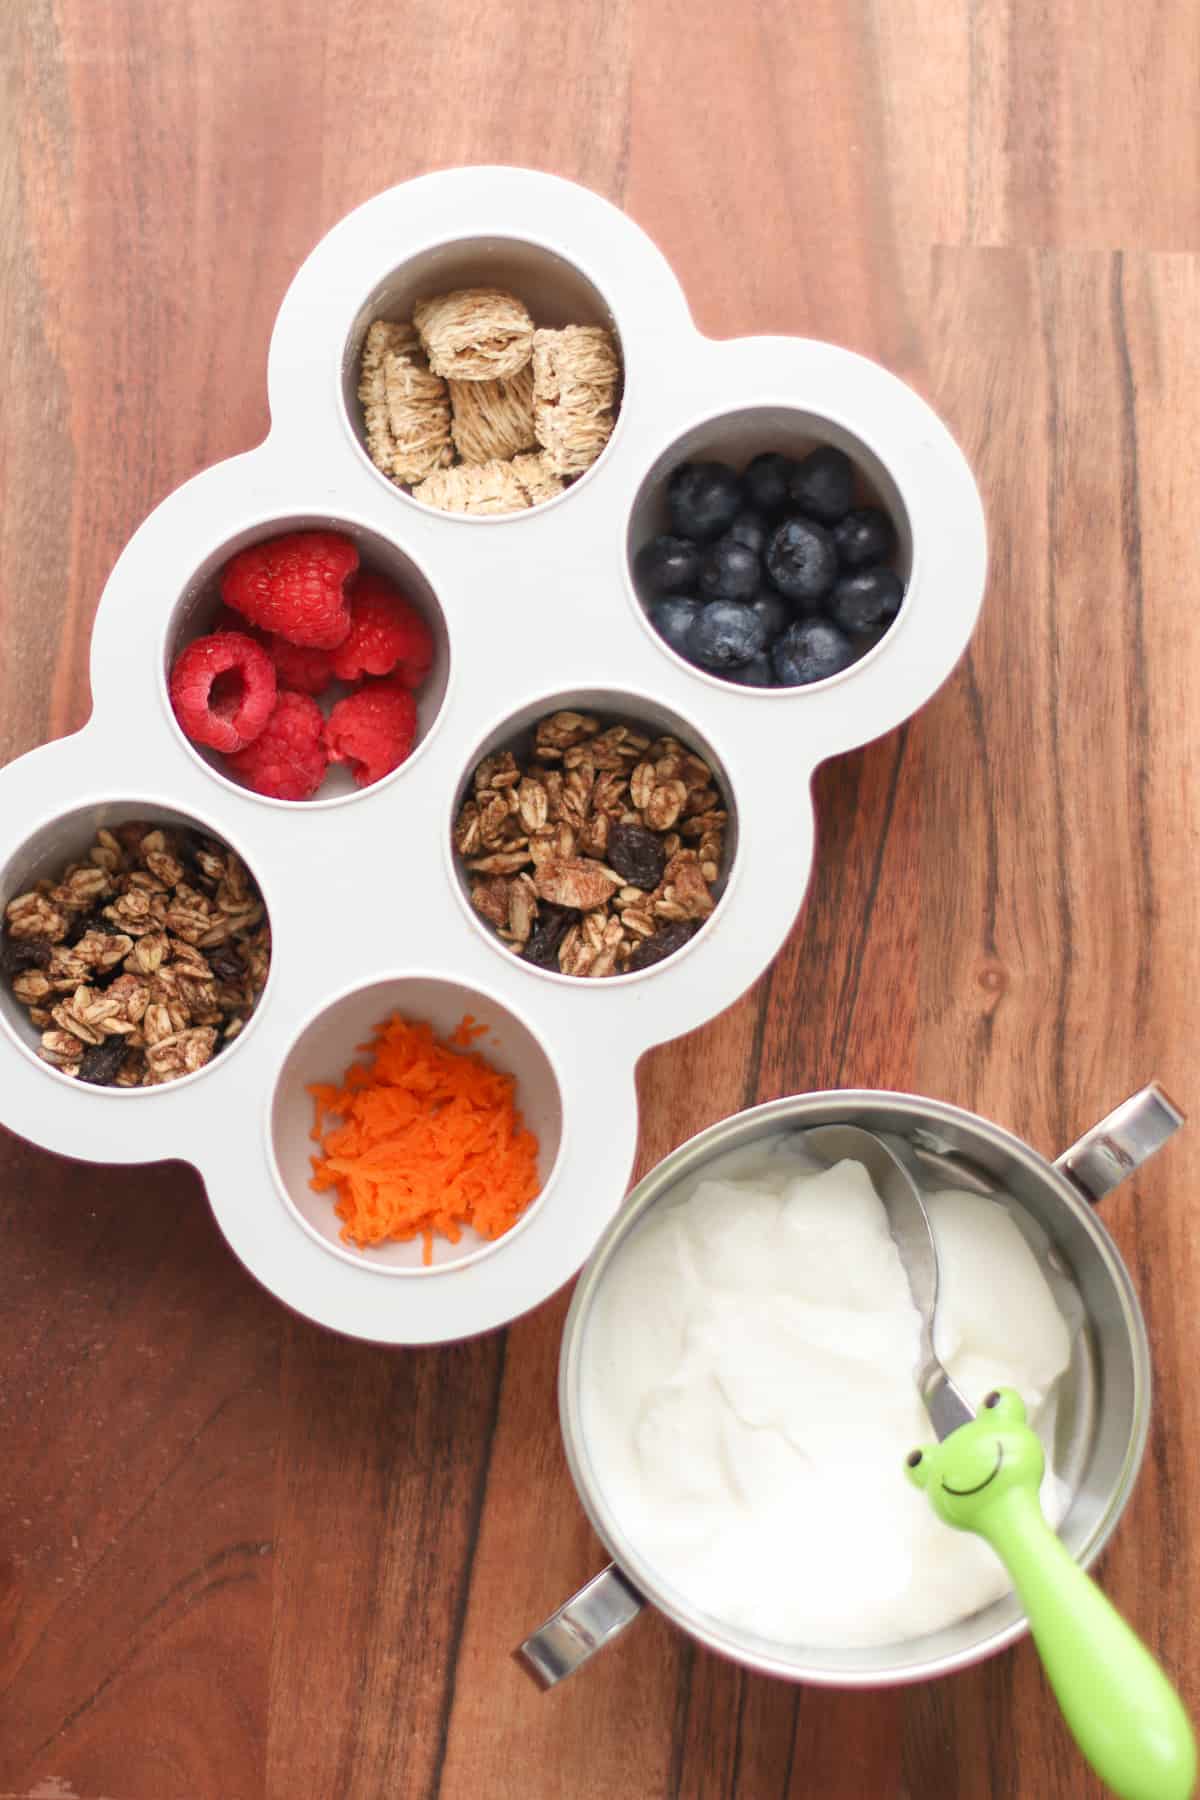 Favorite yogurt toppings in a 6 cup muffin tray with yogurt on the side.